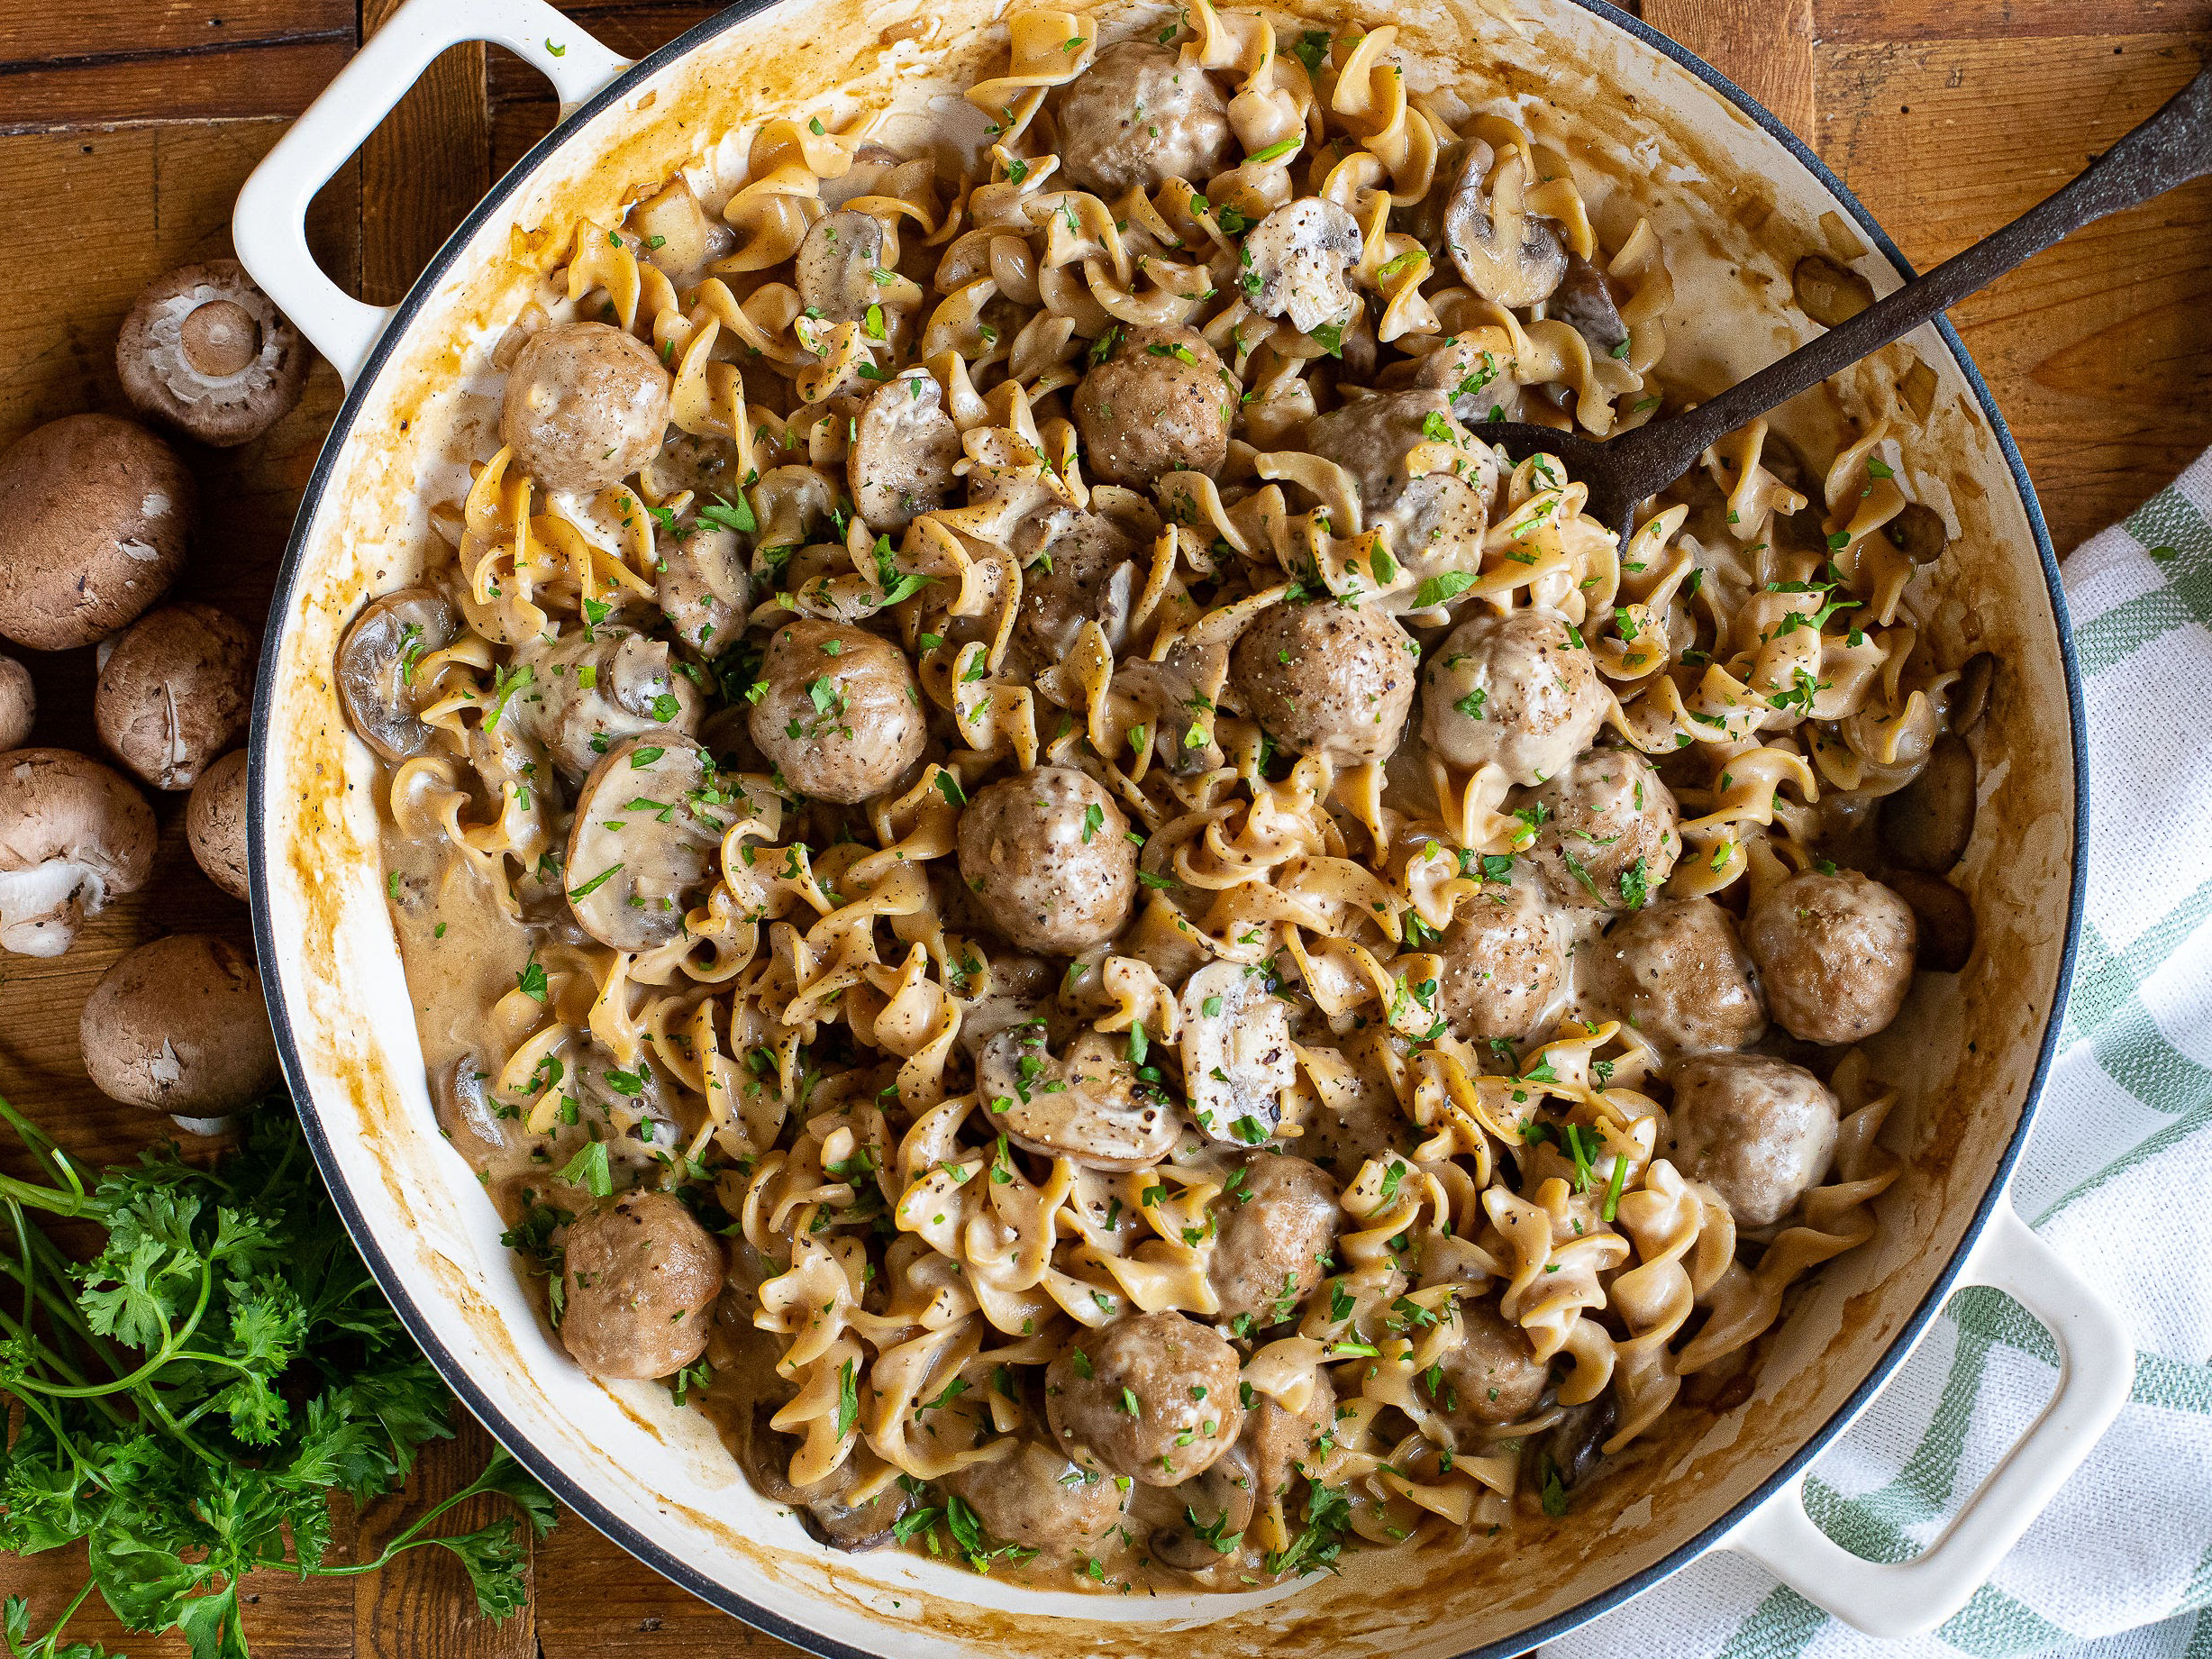 Delicious Armour Meatballs Are BOGO - Grab A Deal For My Meatball Stroganoff on I Heart Publix